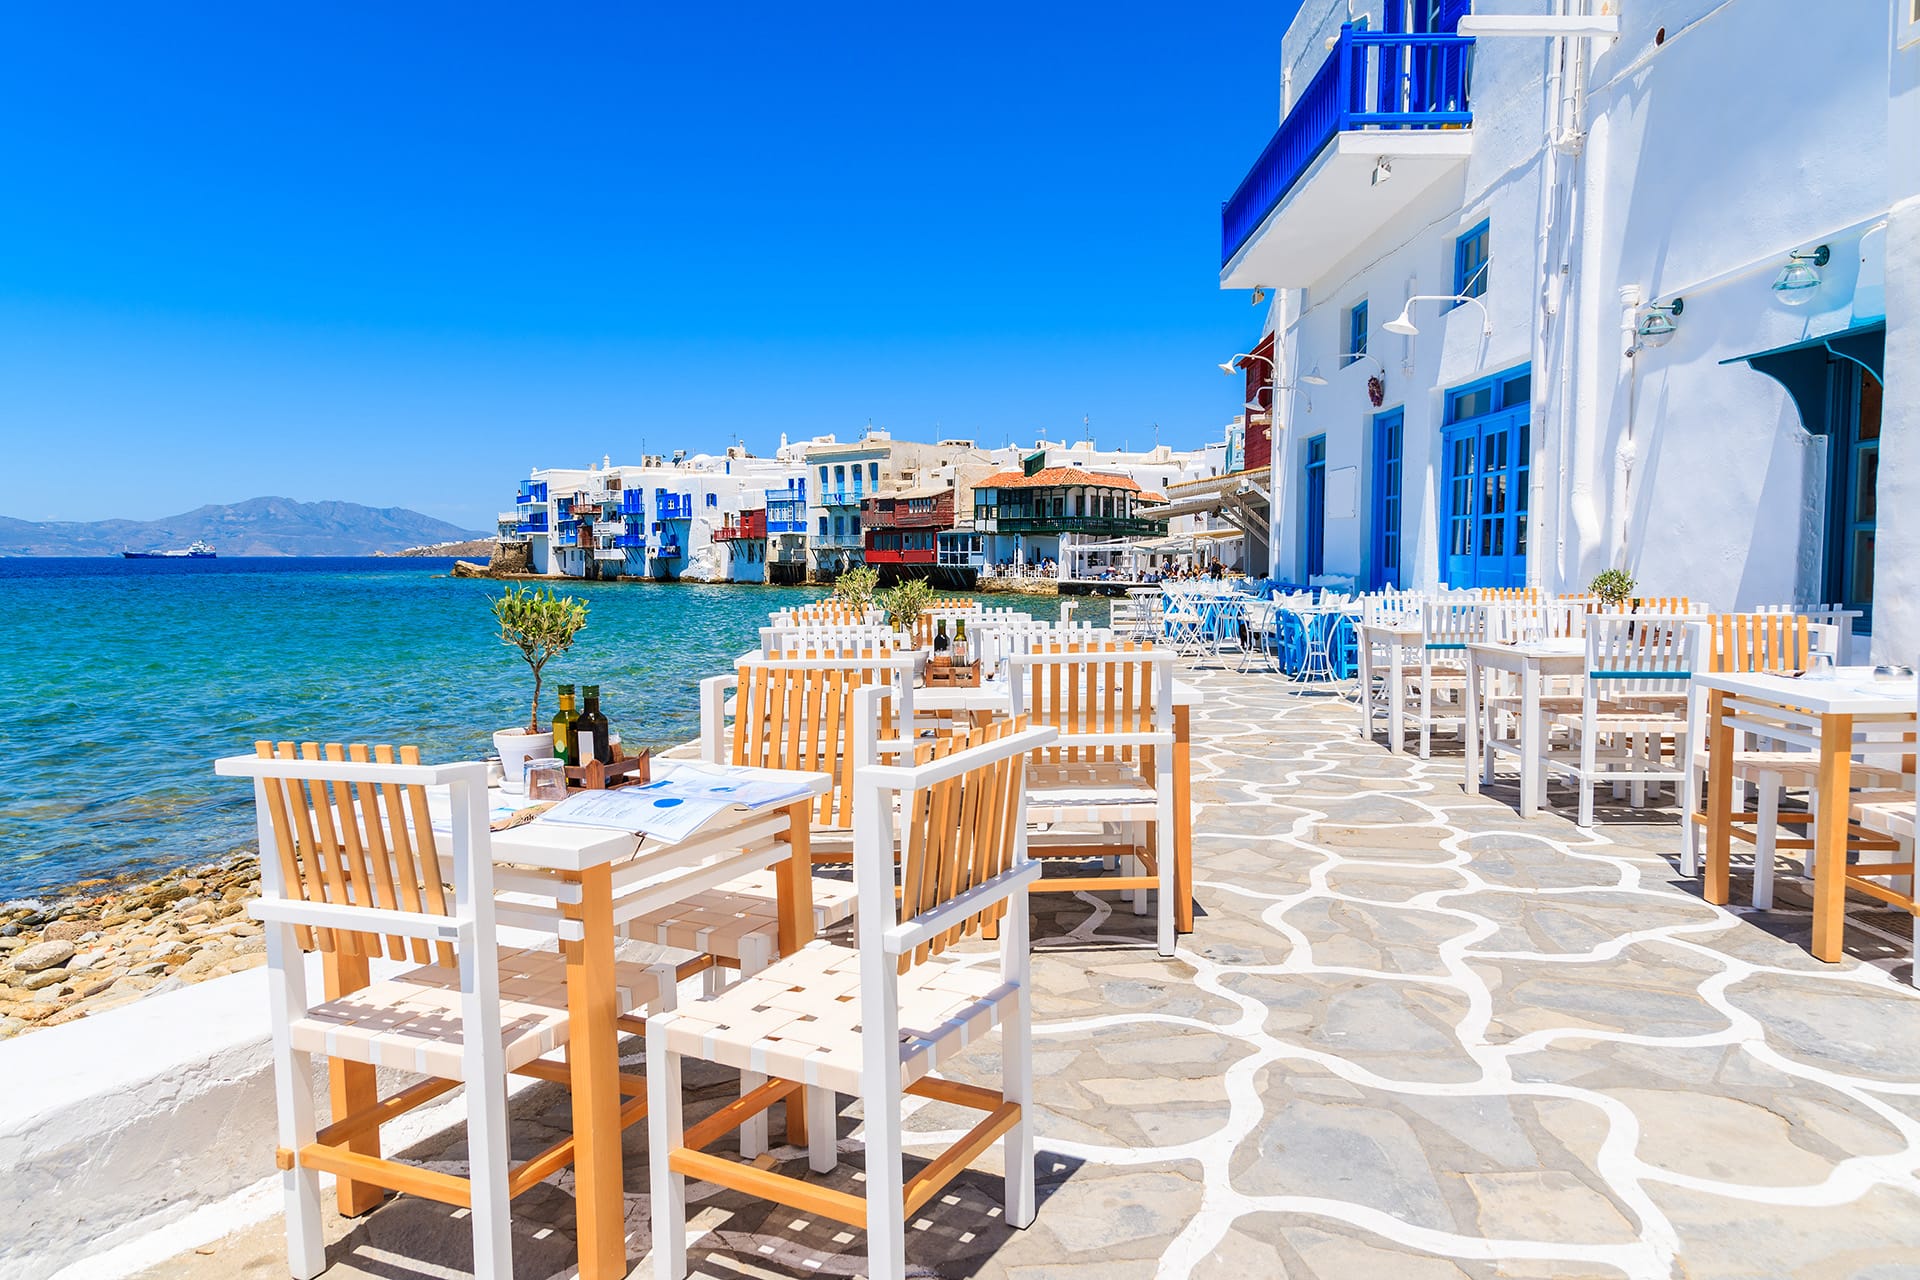 The Cyclades - Yacht Charter Destinations